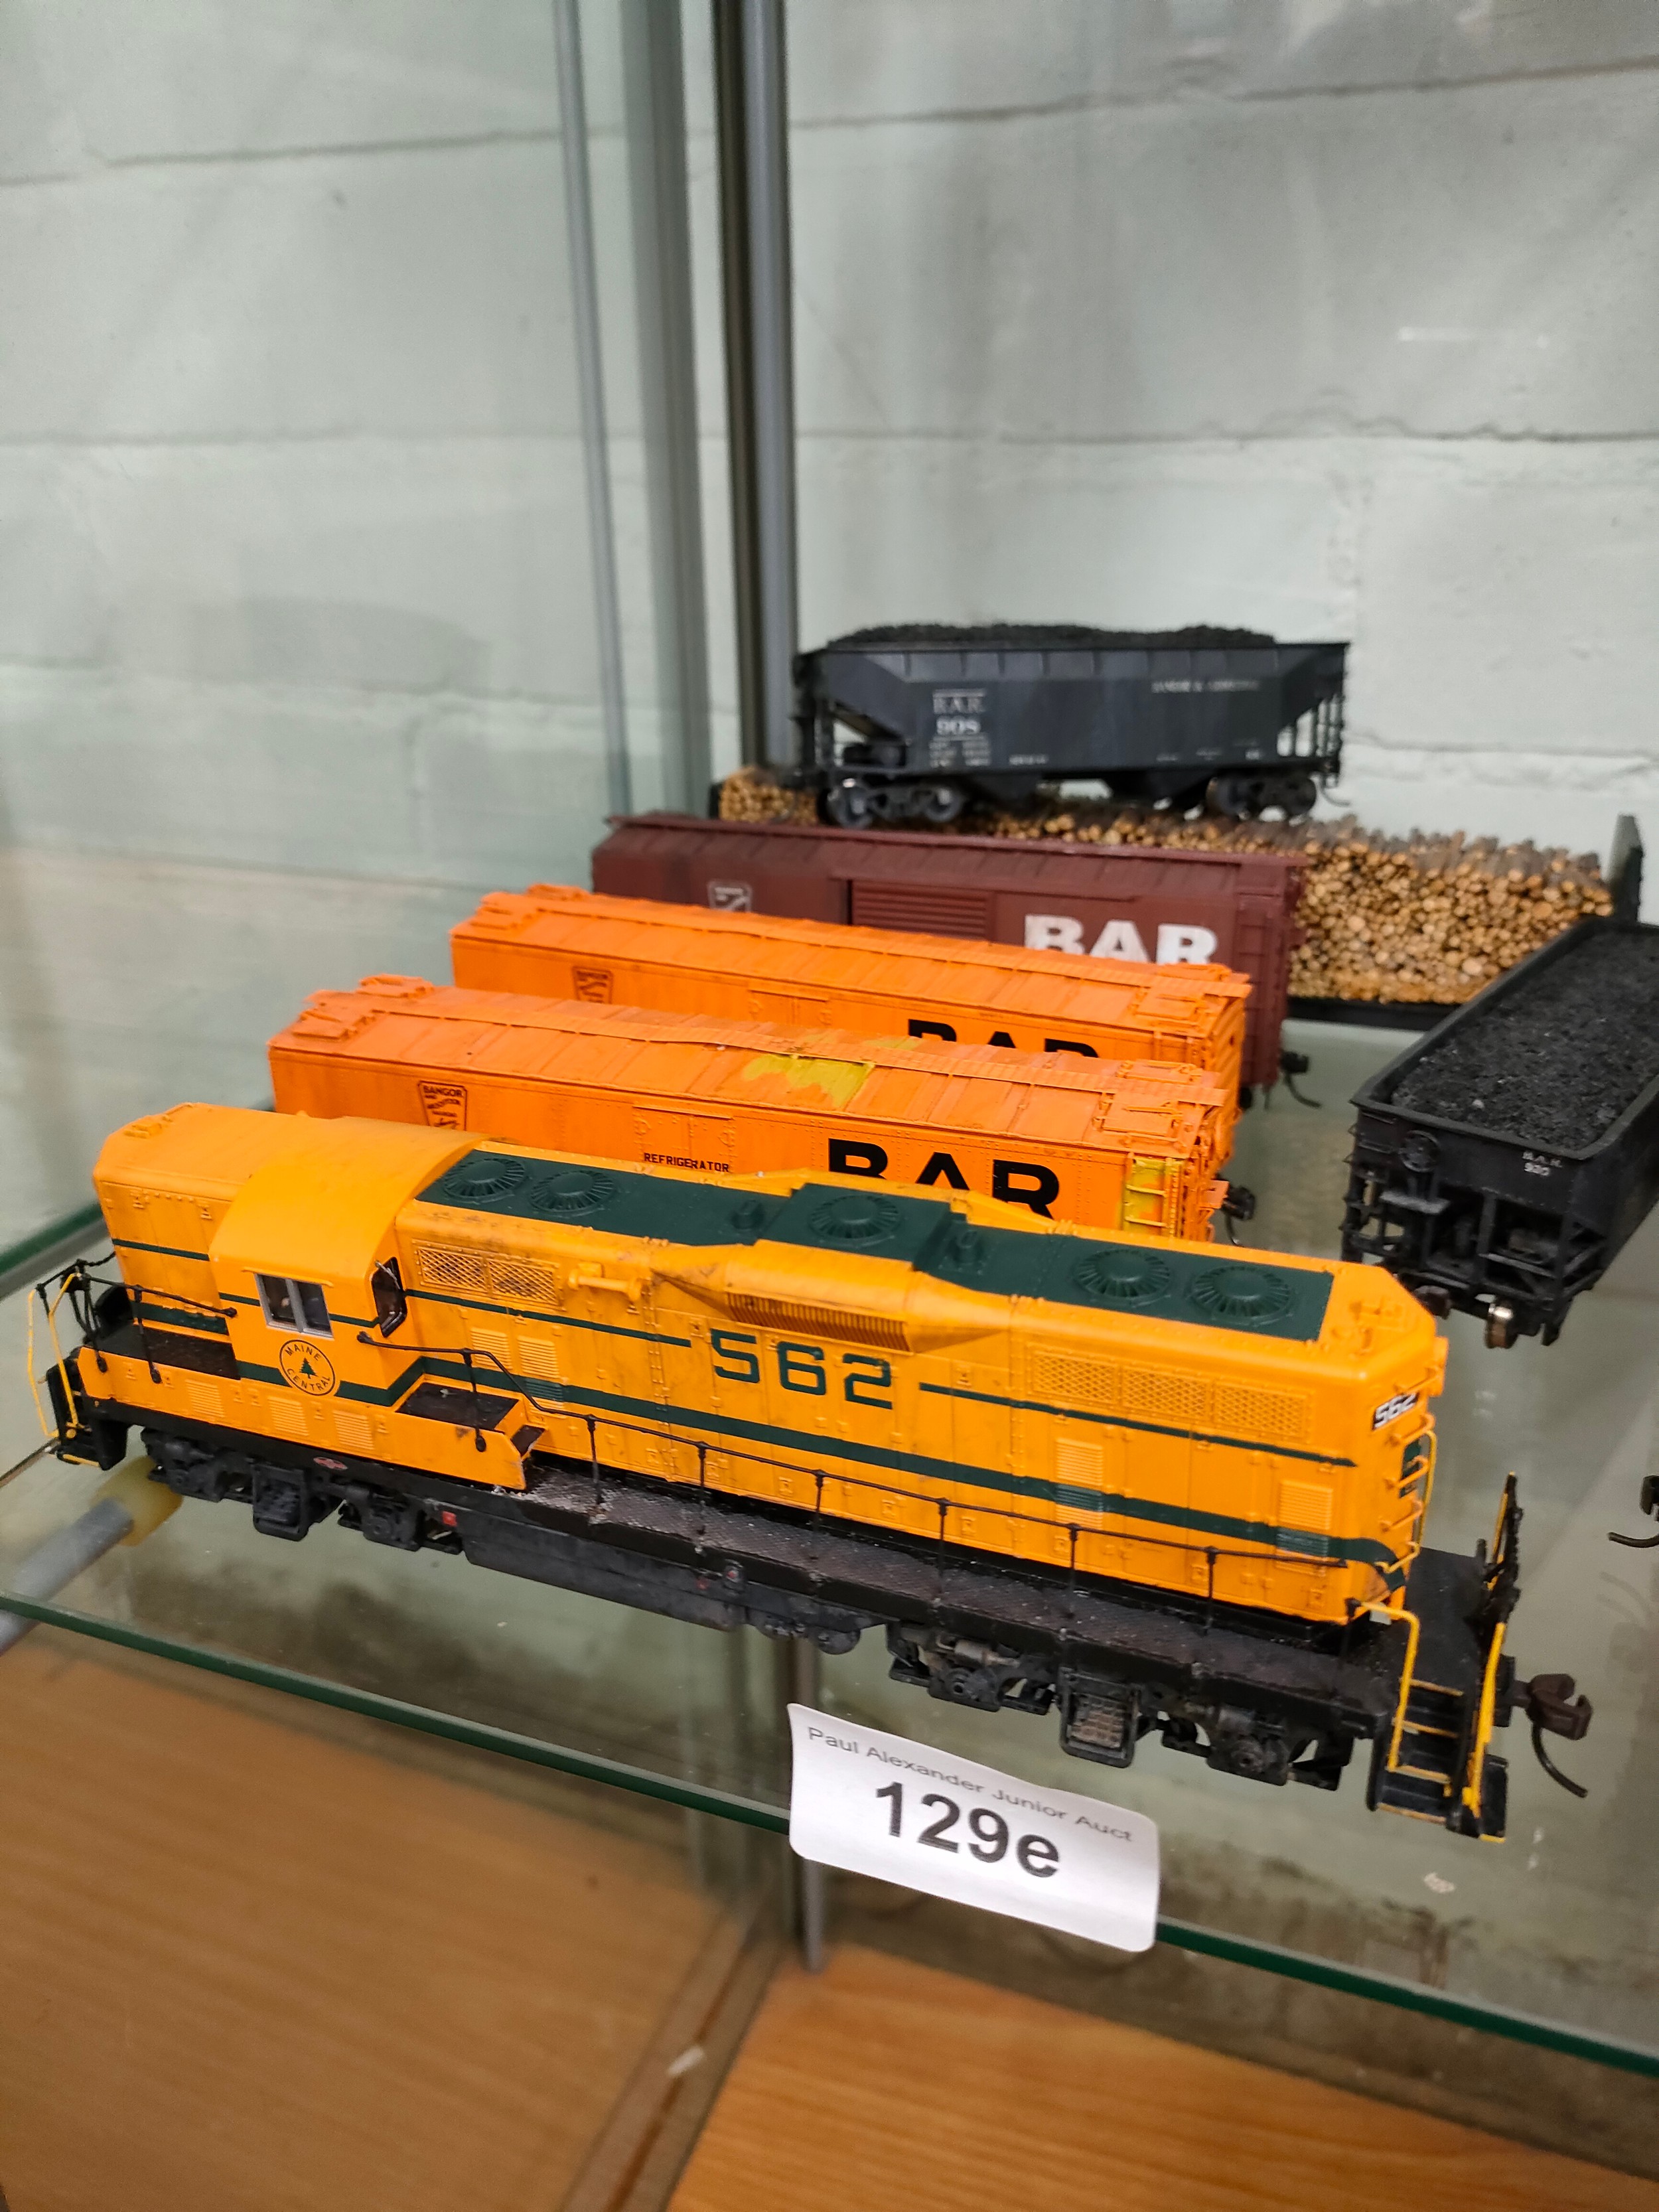 Maine central 562 train model together with rolling carriages. - Image 2 of 4